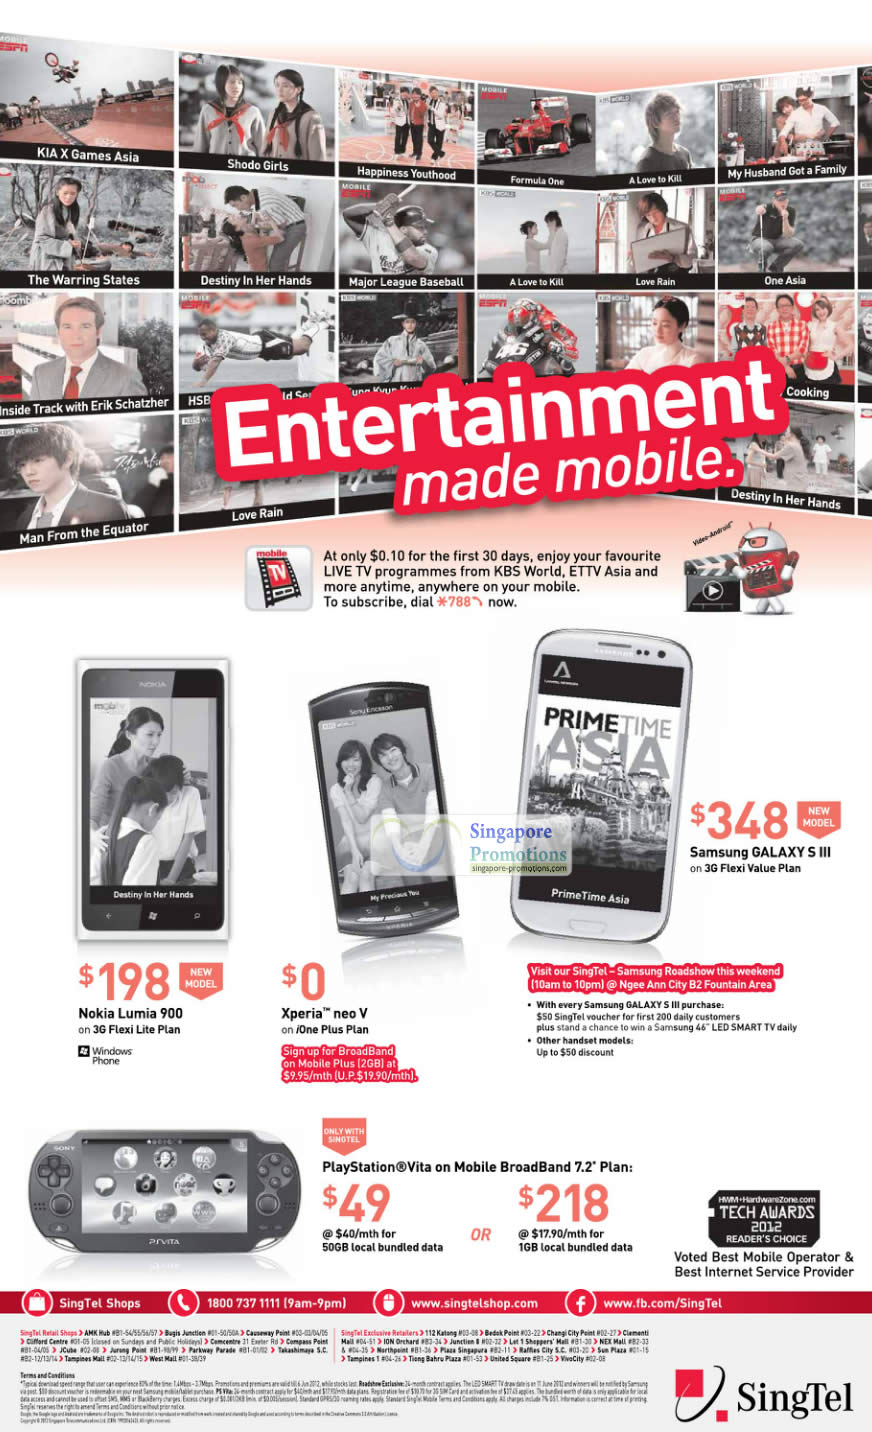 Featured image for Singtel Smartphones, Tablets, Home/Mobile Broadband & Mio TV Offers 2 - 6 Jun 2012